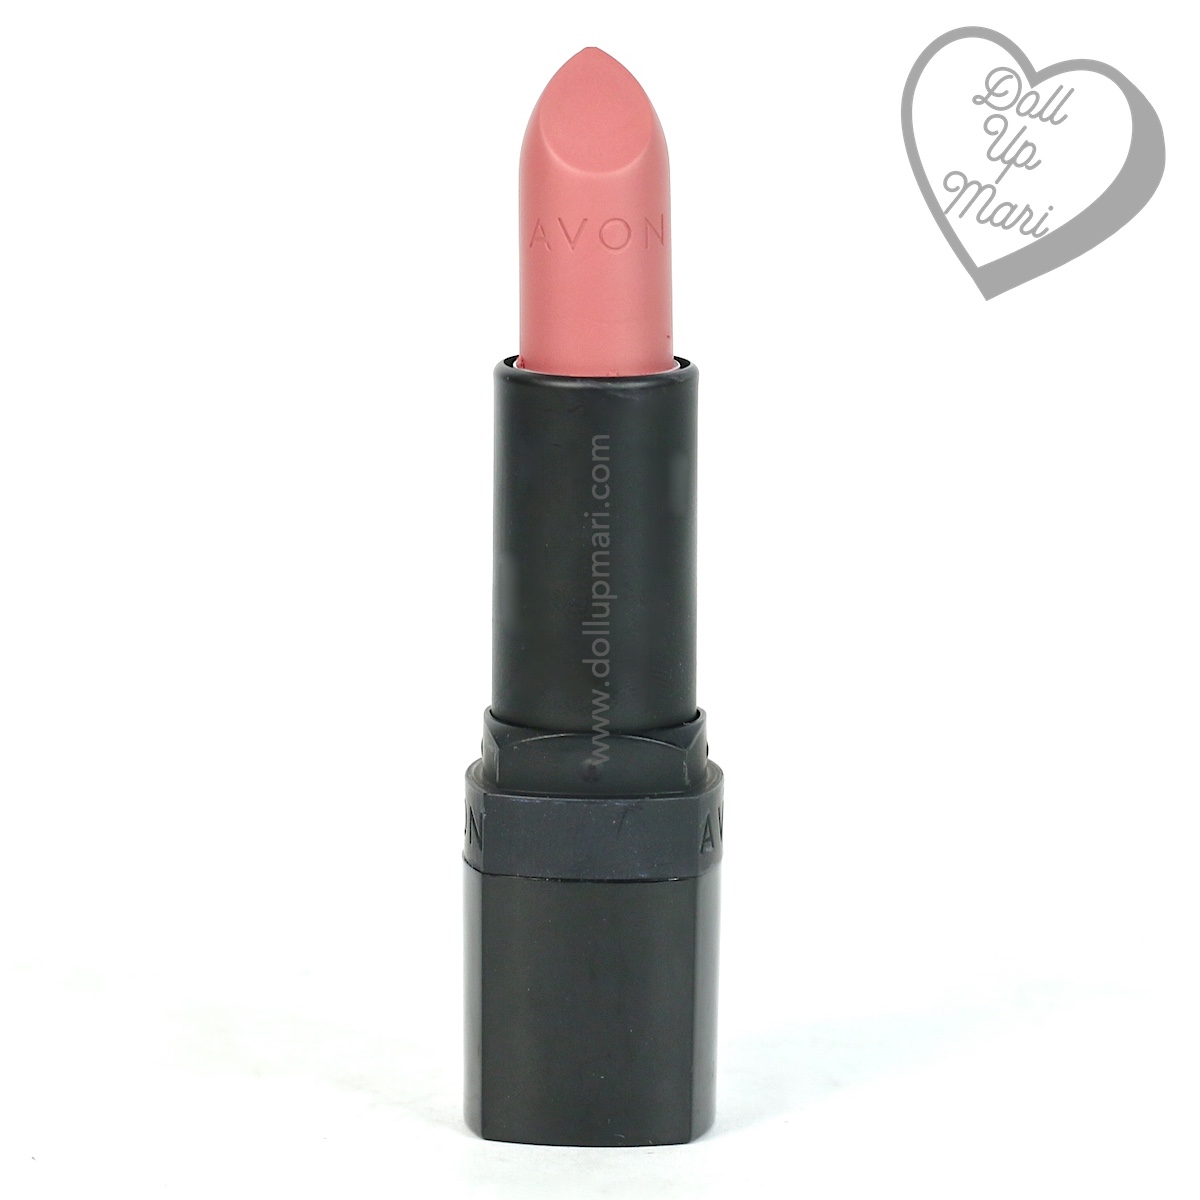 Pack shot of Pure Pink shade of AVON Perfectly Matte Lipstick